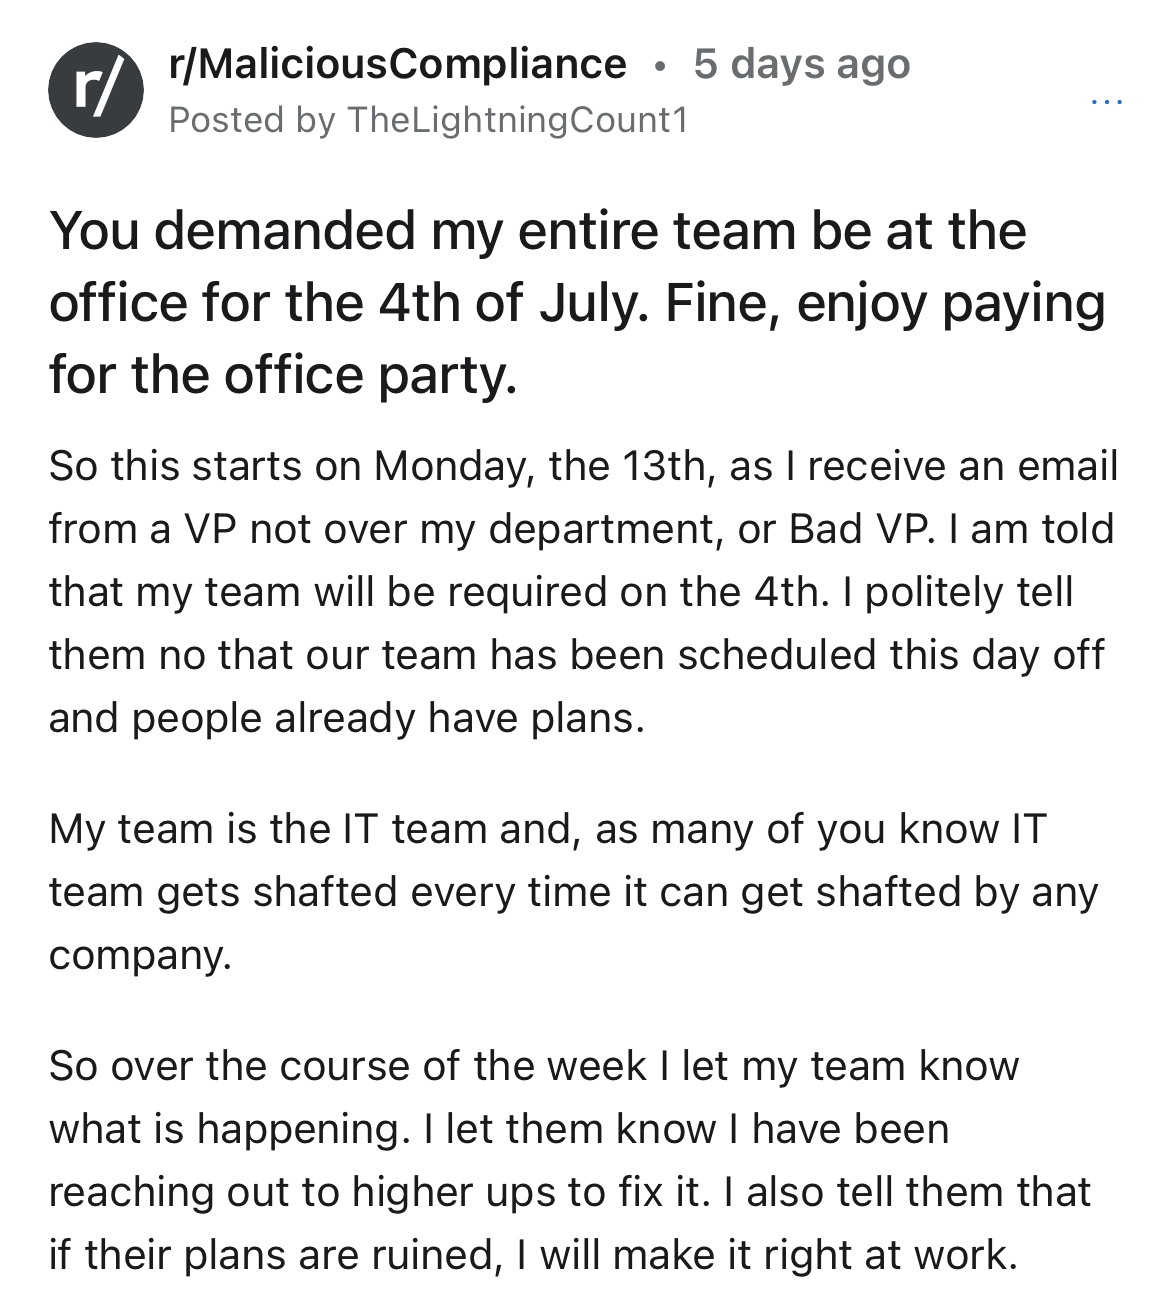 employees throw $6k 4th of July party at work -document - rMaliciousCompliance. 5 days ago Posted by TheLightning Count1 r You demanded my entire team be at the office for the 4th of July. Fine, enjoy paying for the office party. So this starts on Monday,